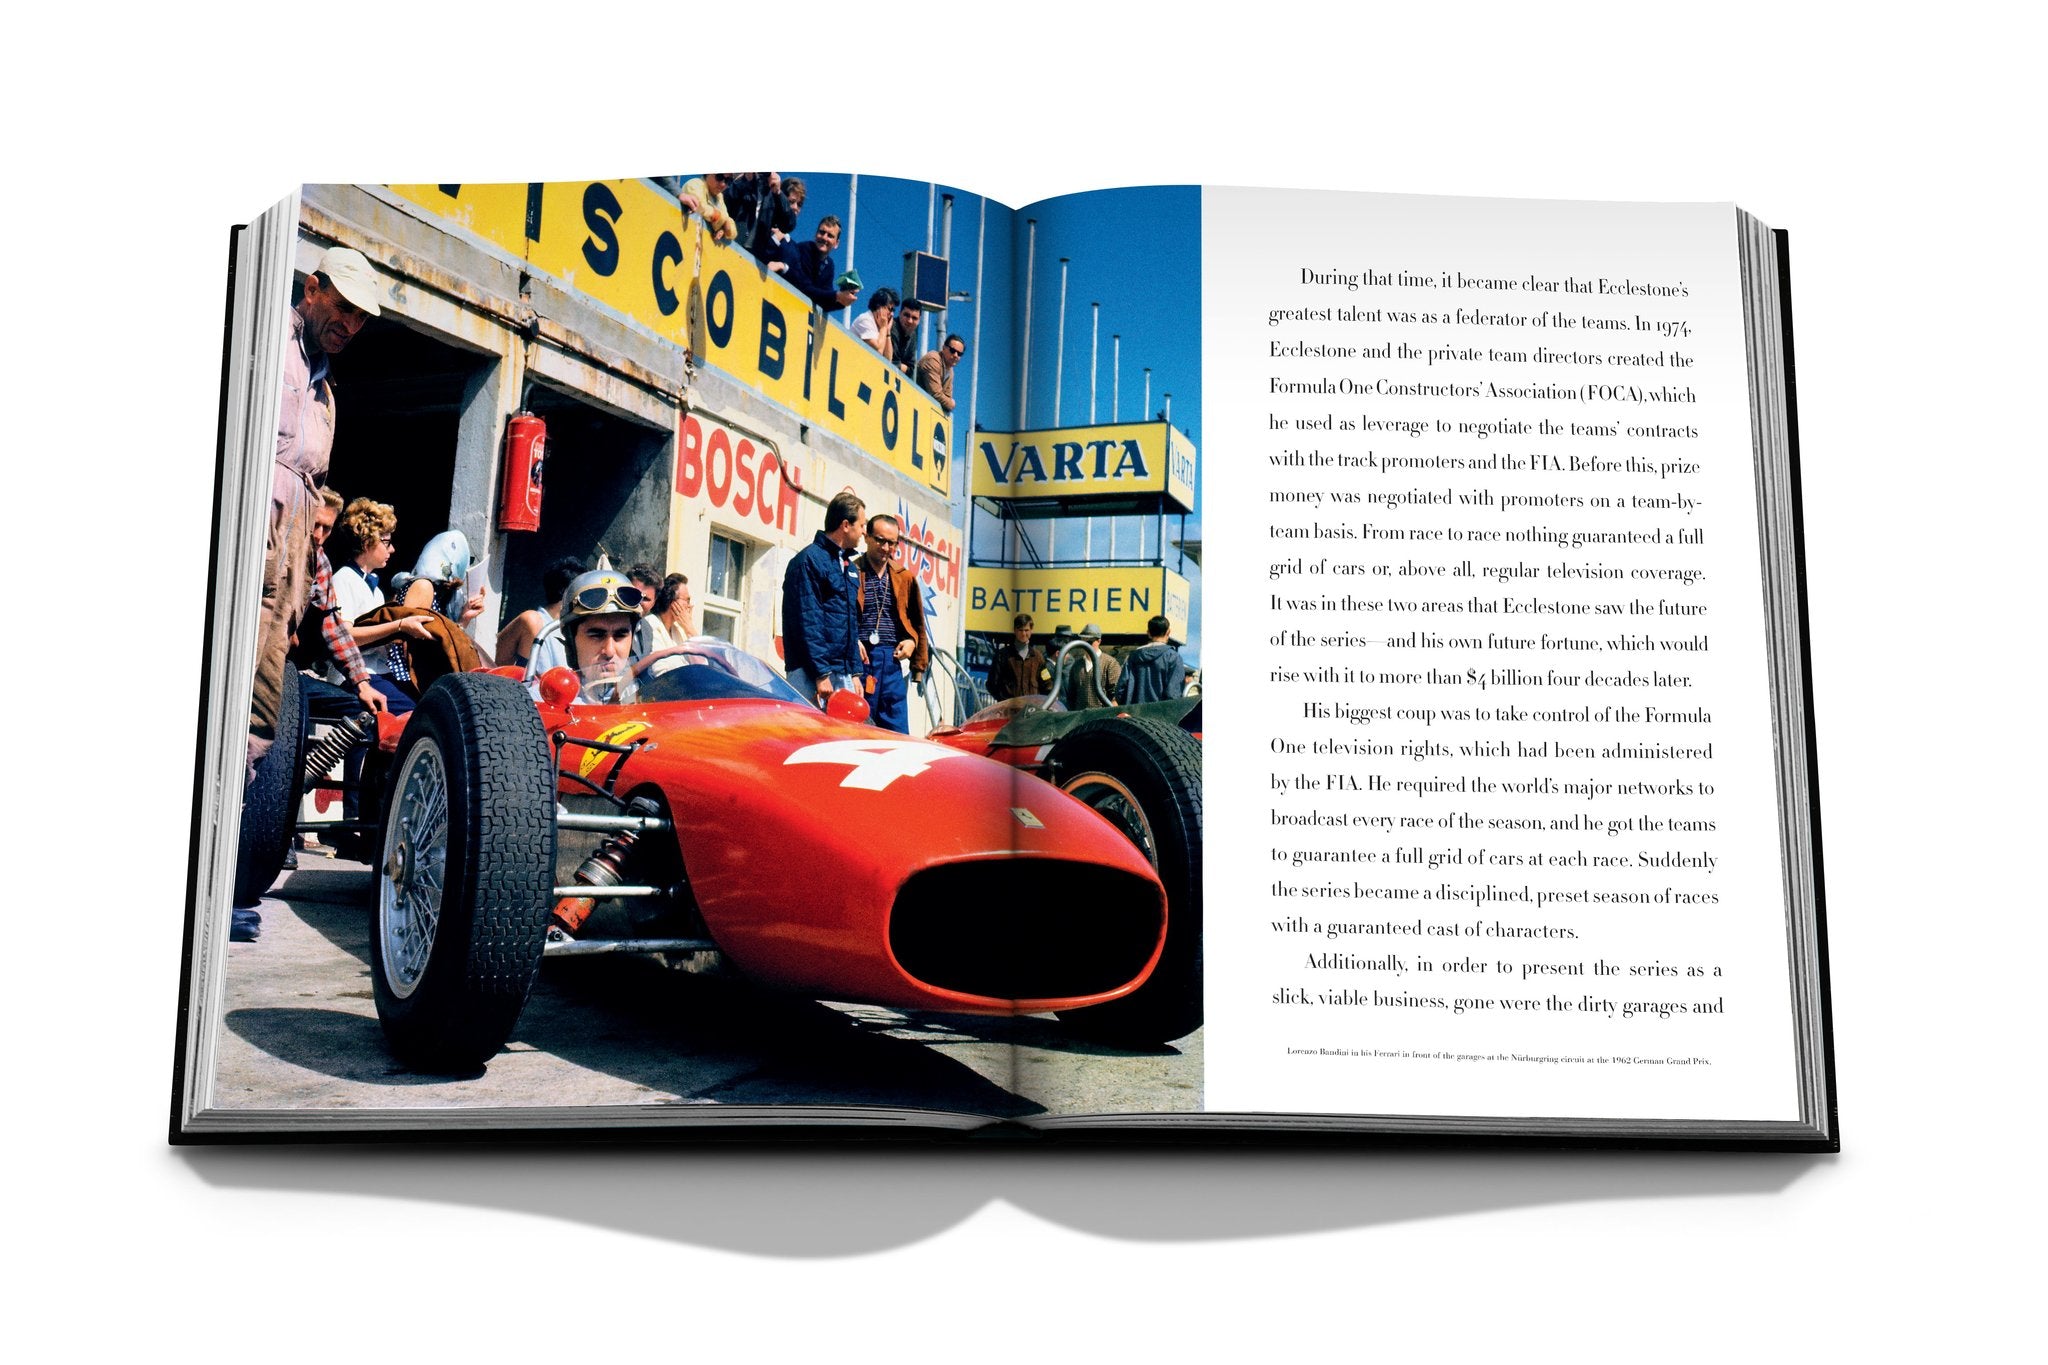 ASSOULINE Formula 1: The Impossible Collection Hardcover Book by Brad Spurgeon